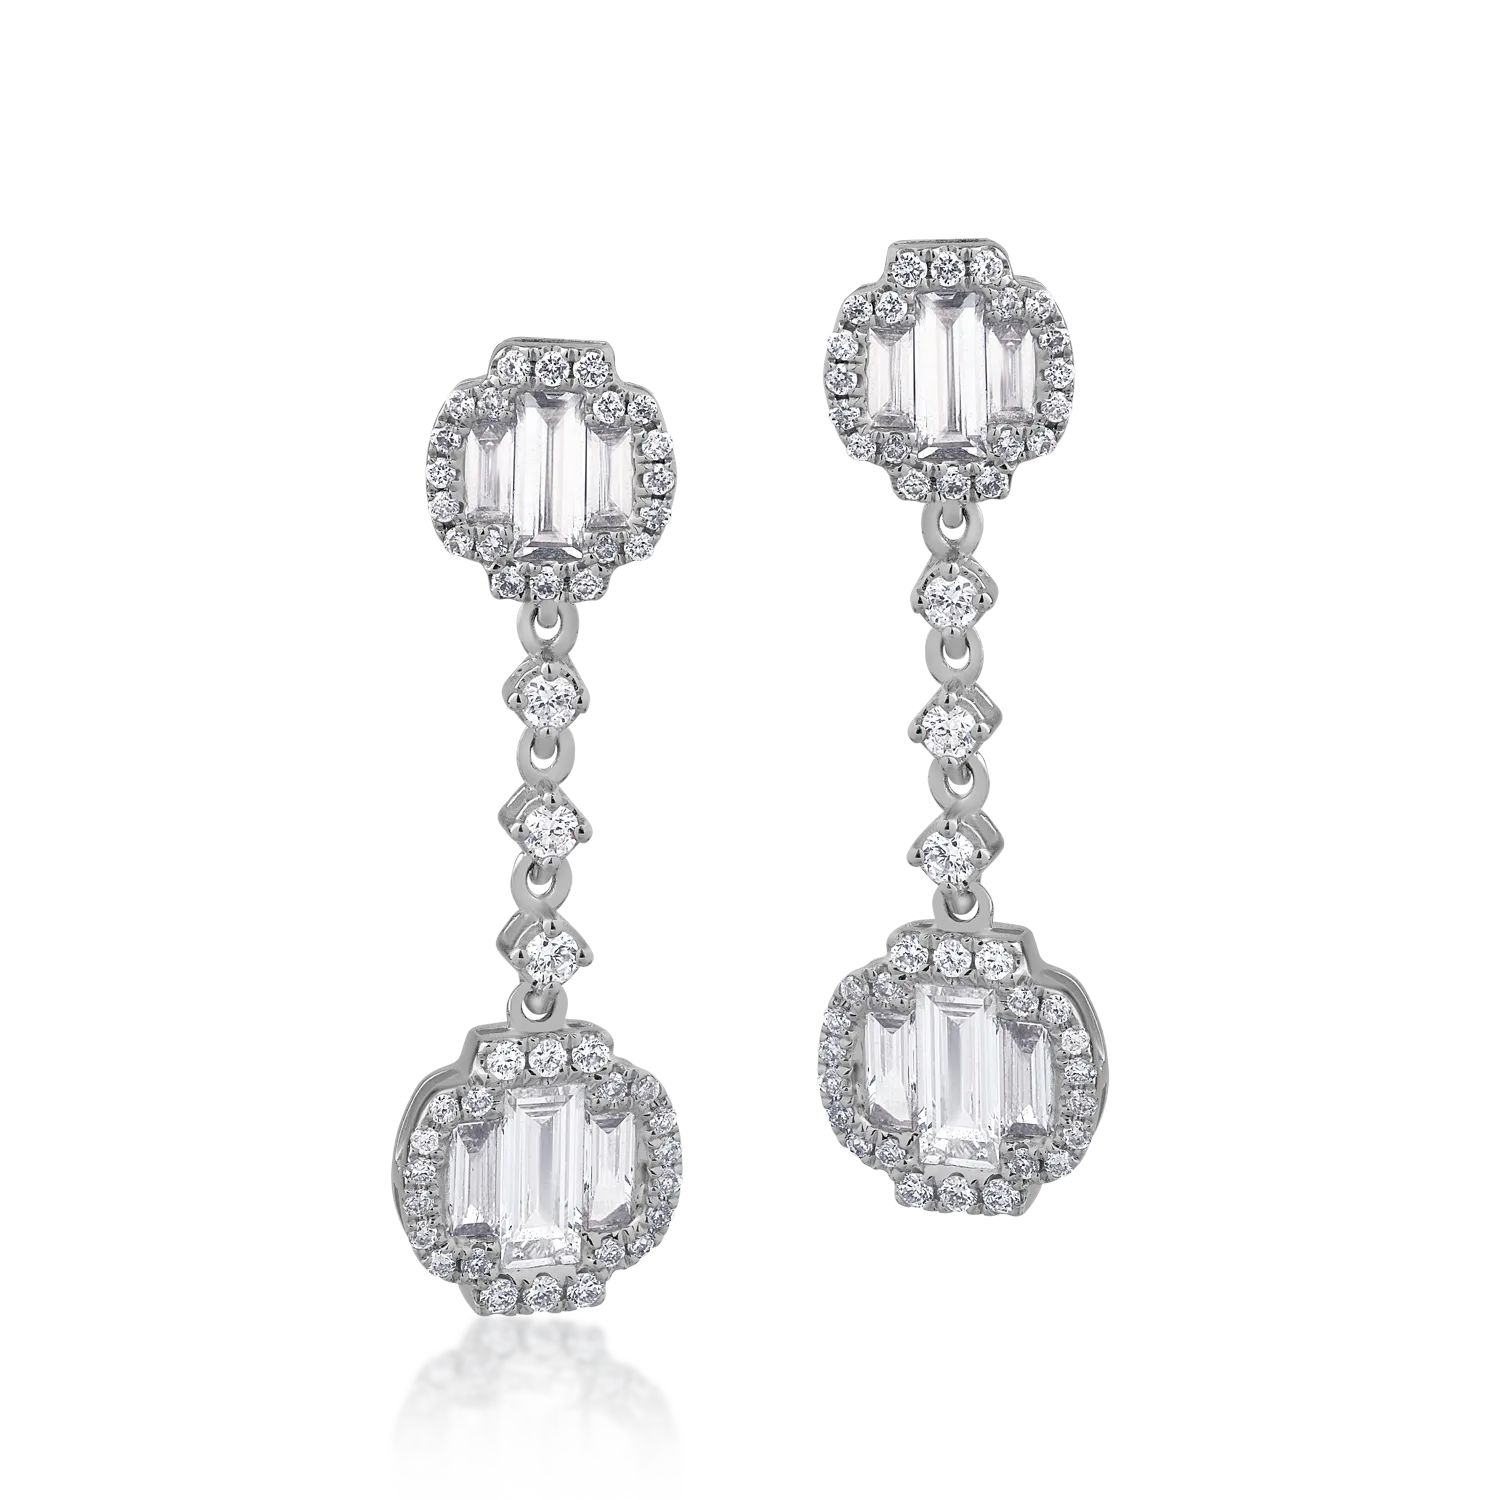 18K white gold earrings with 1.36ct diamonds